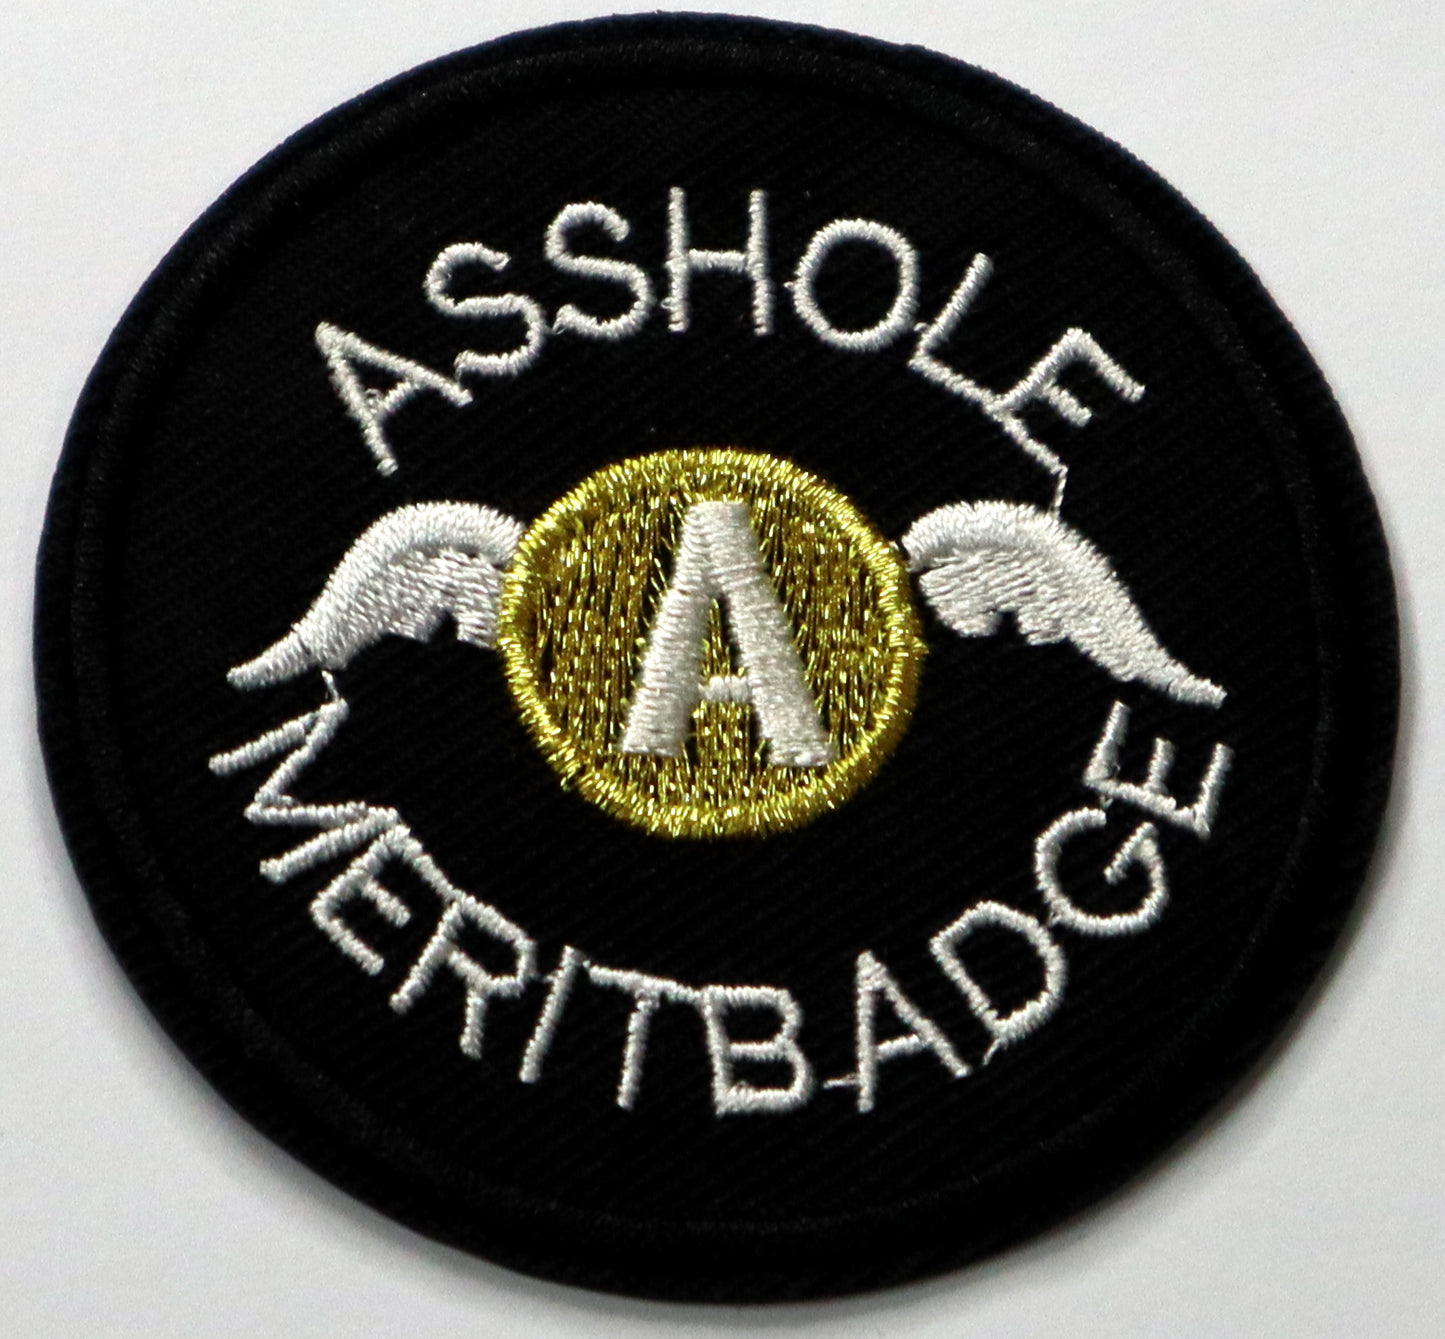 Asshole merit badge Iron On Patch. Great for attaching to your jackets, shirts, pants, jeans, hats.  Size: 7cm